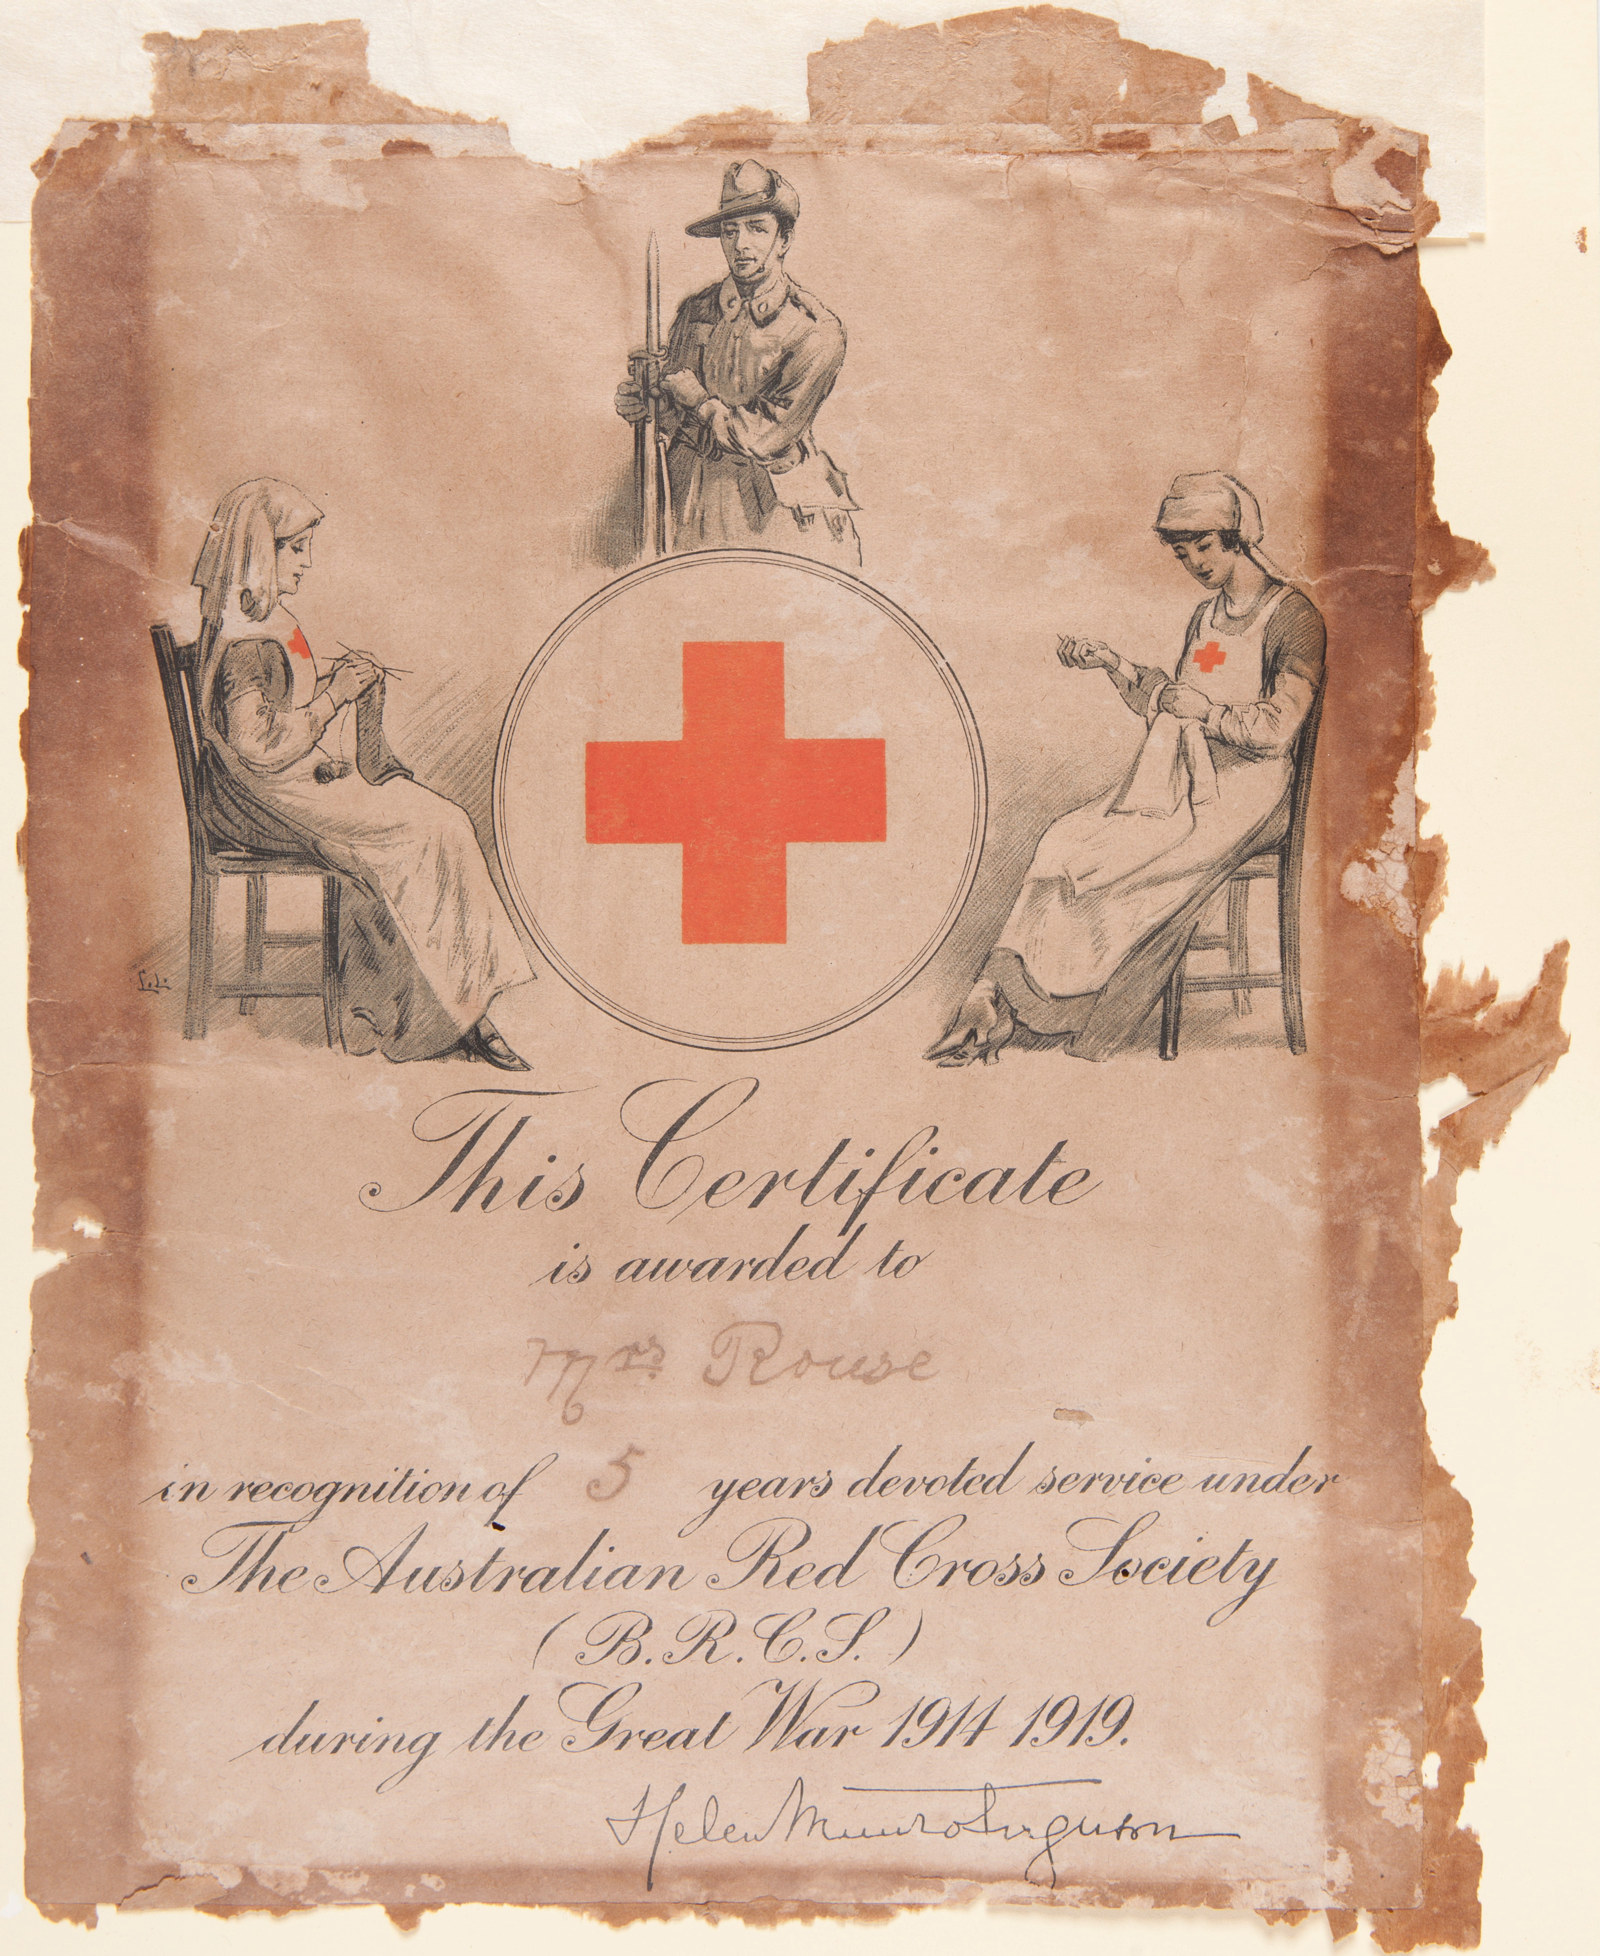 Frayed at edges, certificate with red cross symbol in ornate diagram at top, and cursive script below.